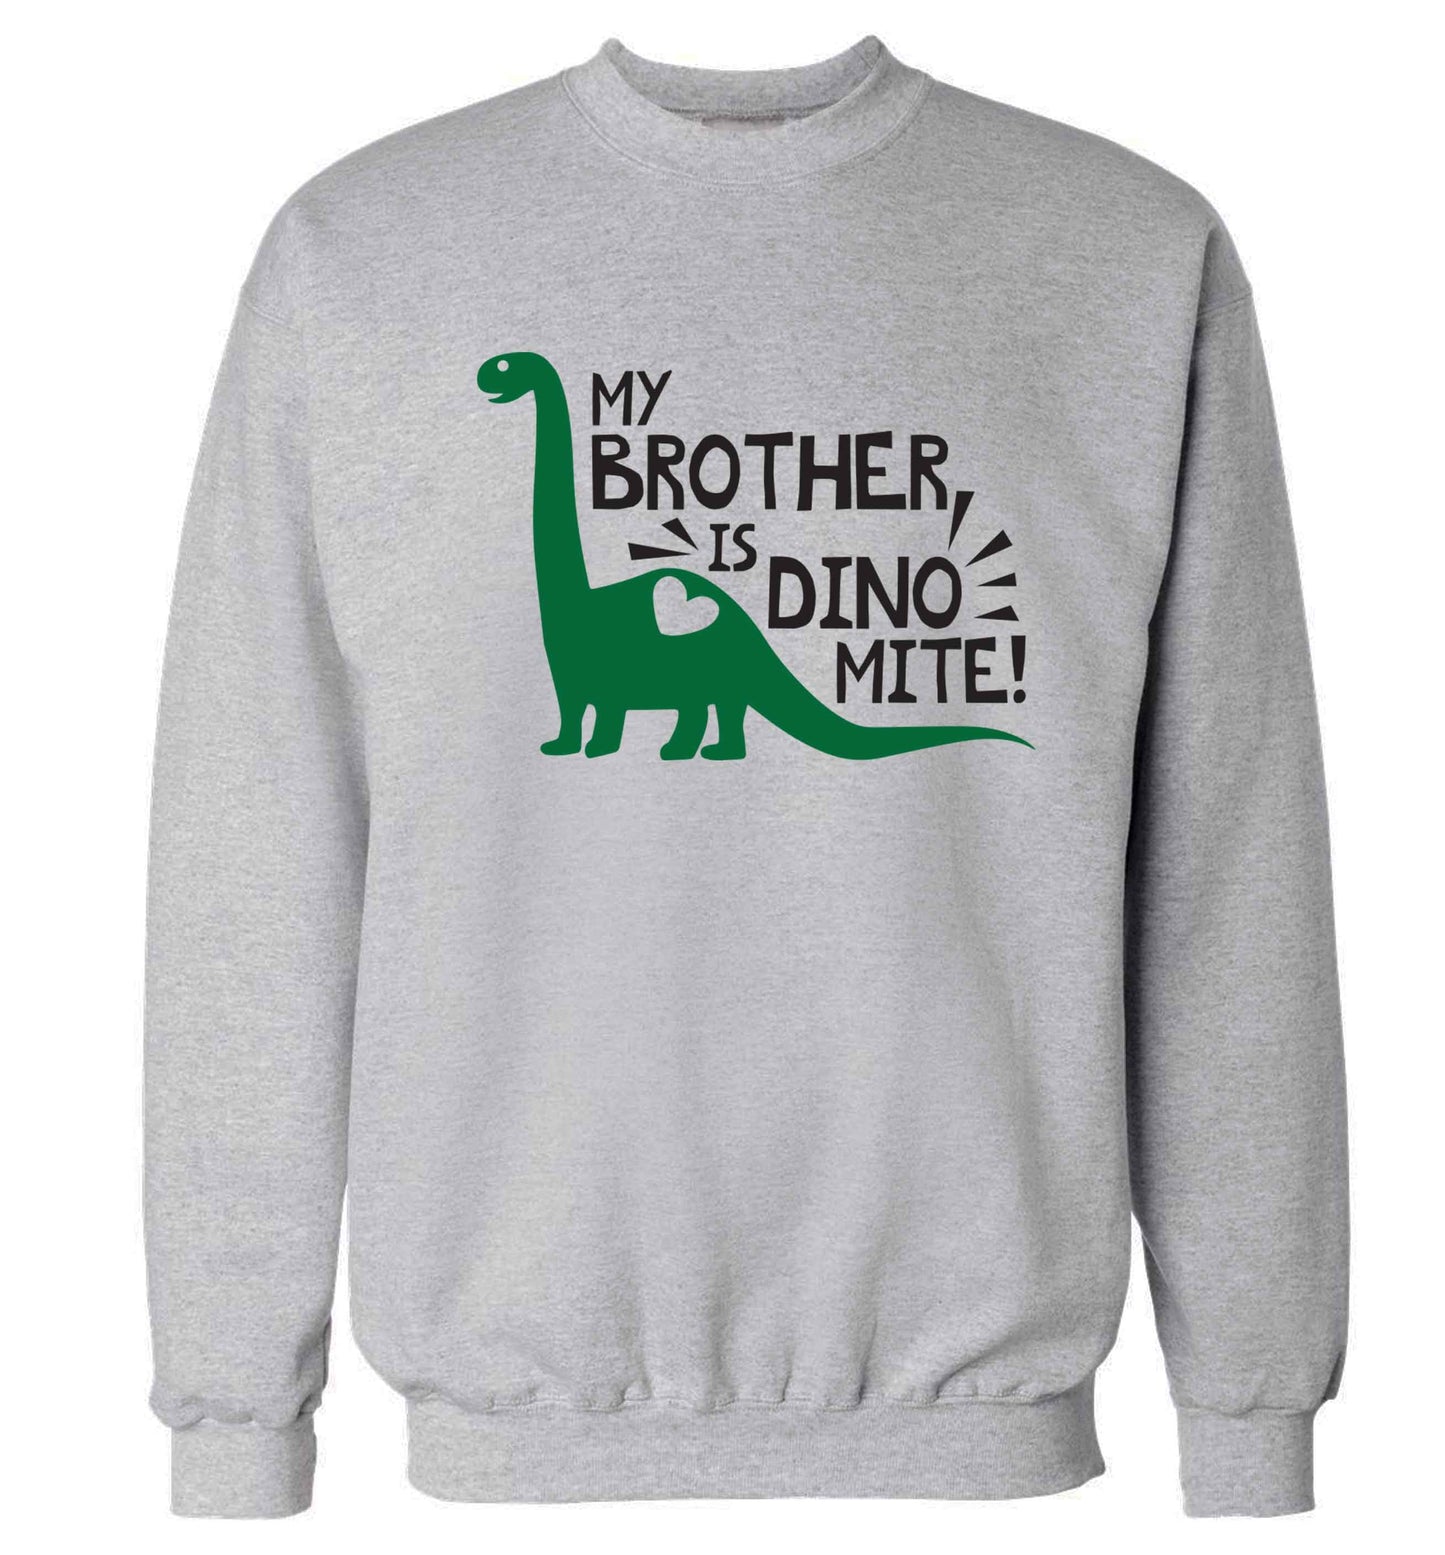 My brother is dinomite! Adult's unisex grey Sweater 2XL